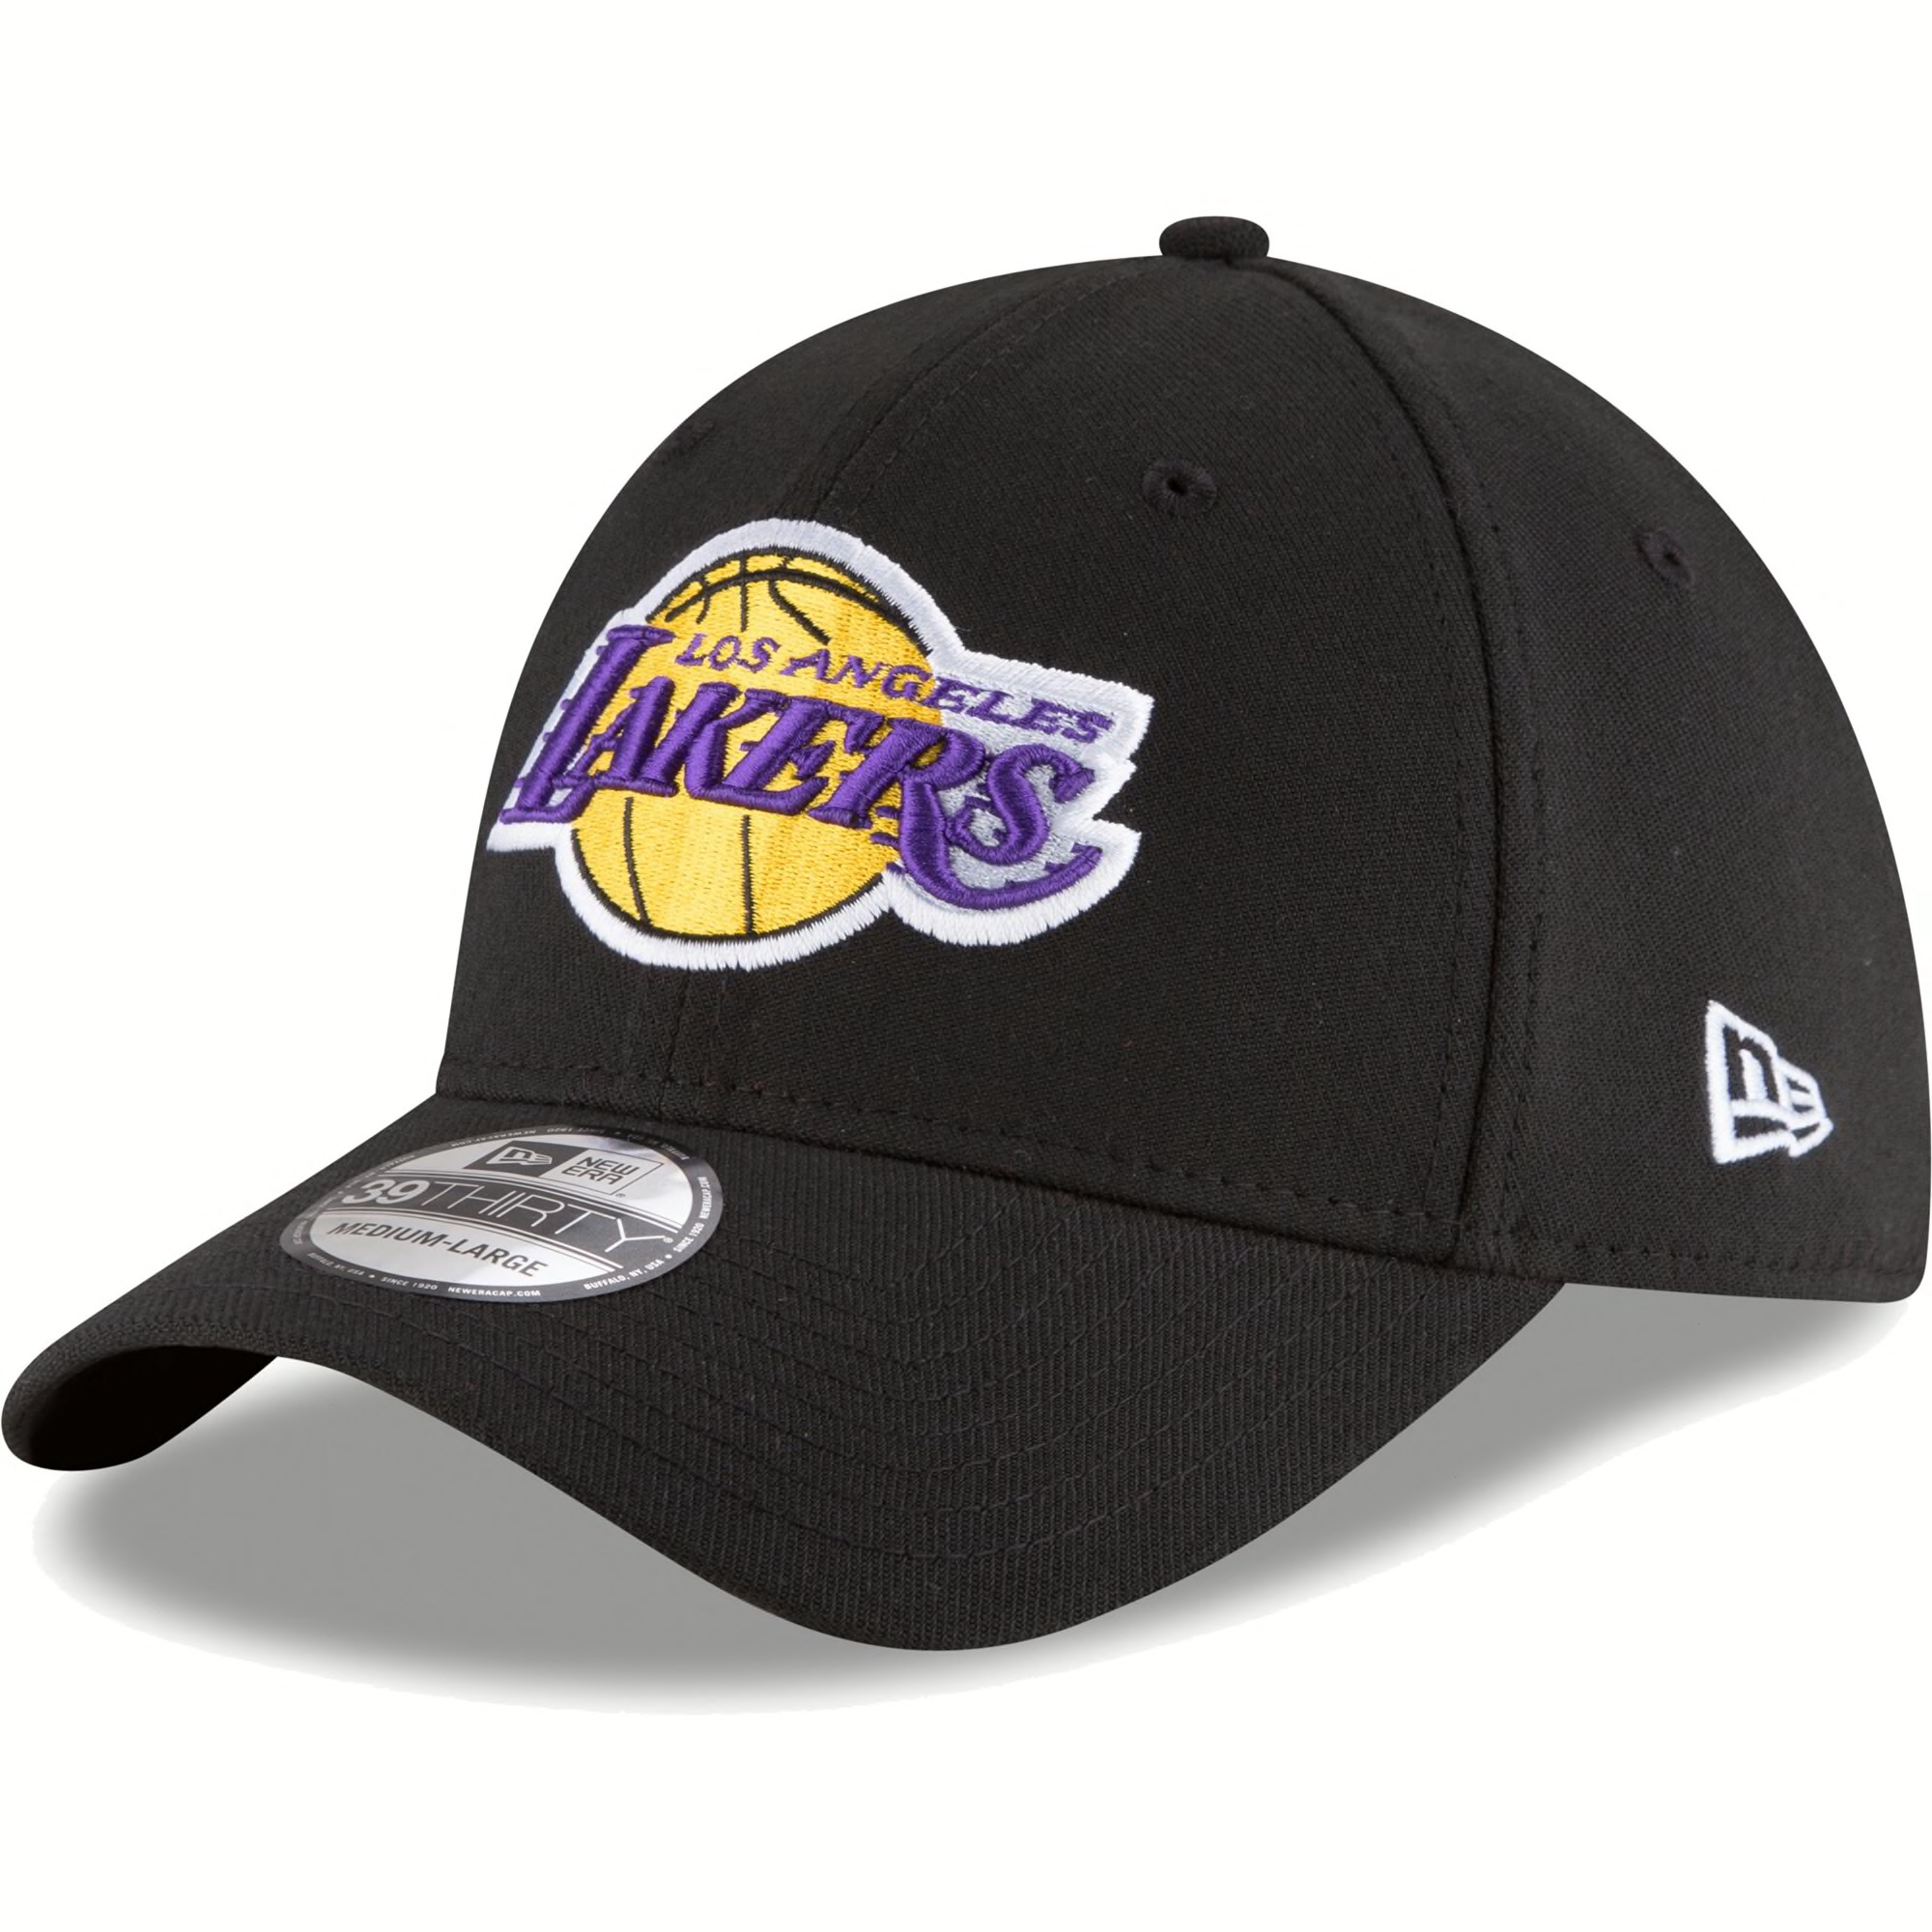 Los Angeles Lakers Father's Day gift guide